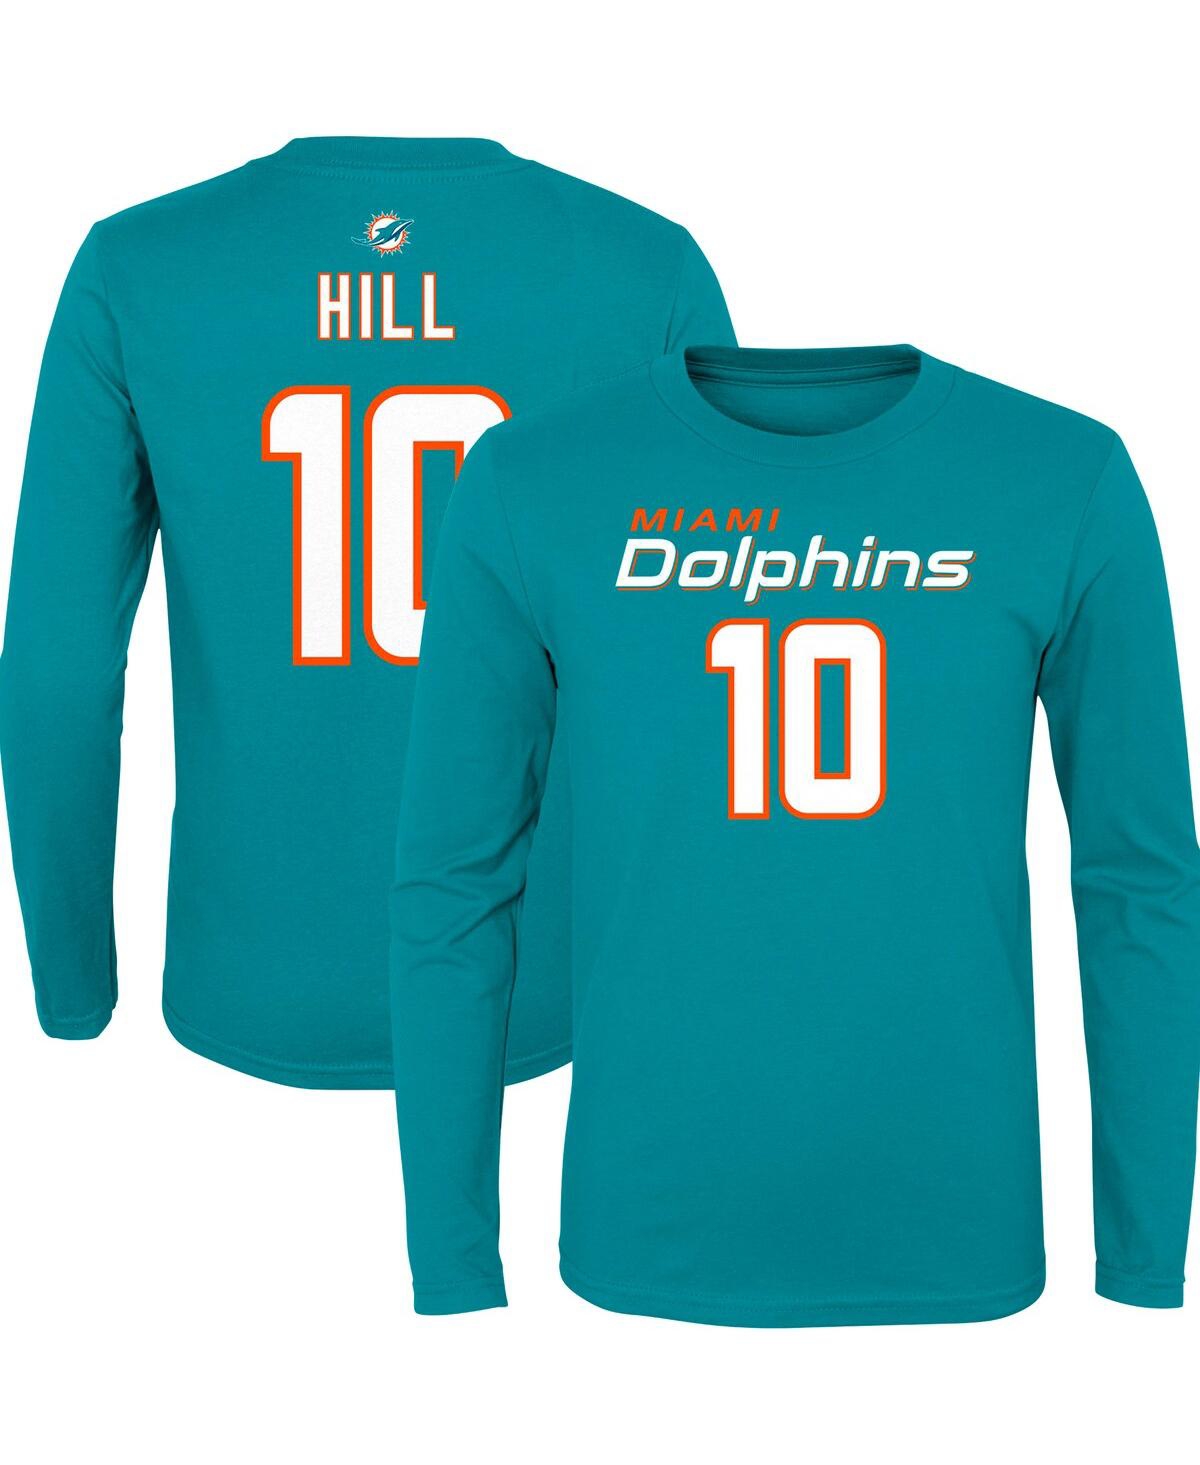 OUTERSTUFF BIG BOYS TYREEK HILL AQUA MIAMI DOLPHINS MAINLINER PLAYER NAME AND NUMBER LONG SLEEVE T-SHIRT